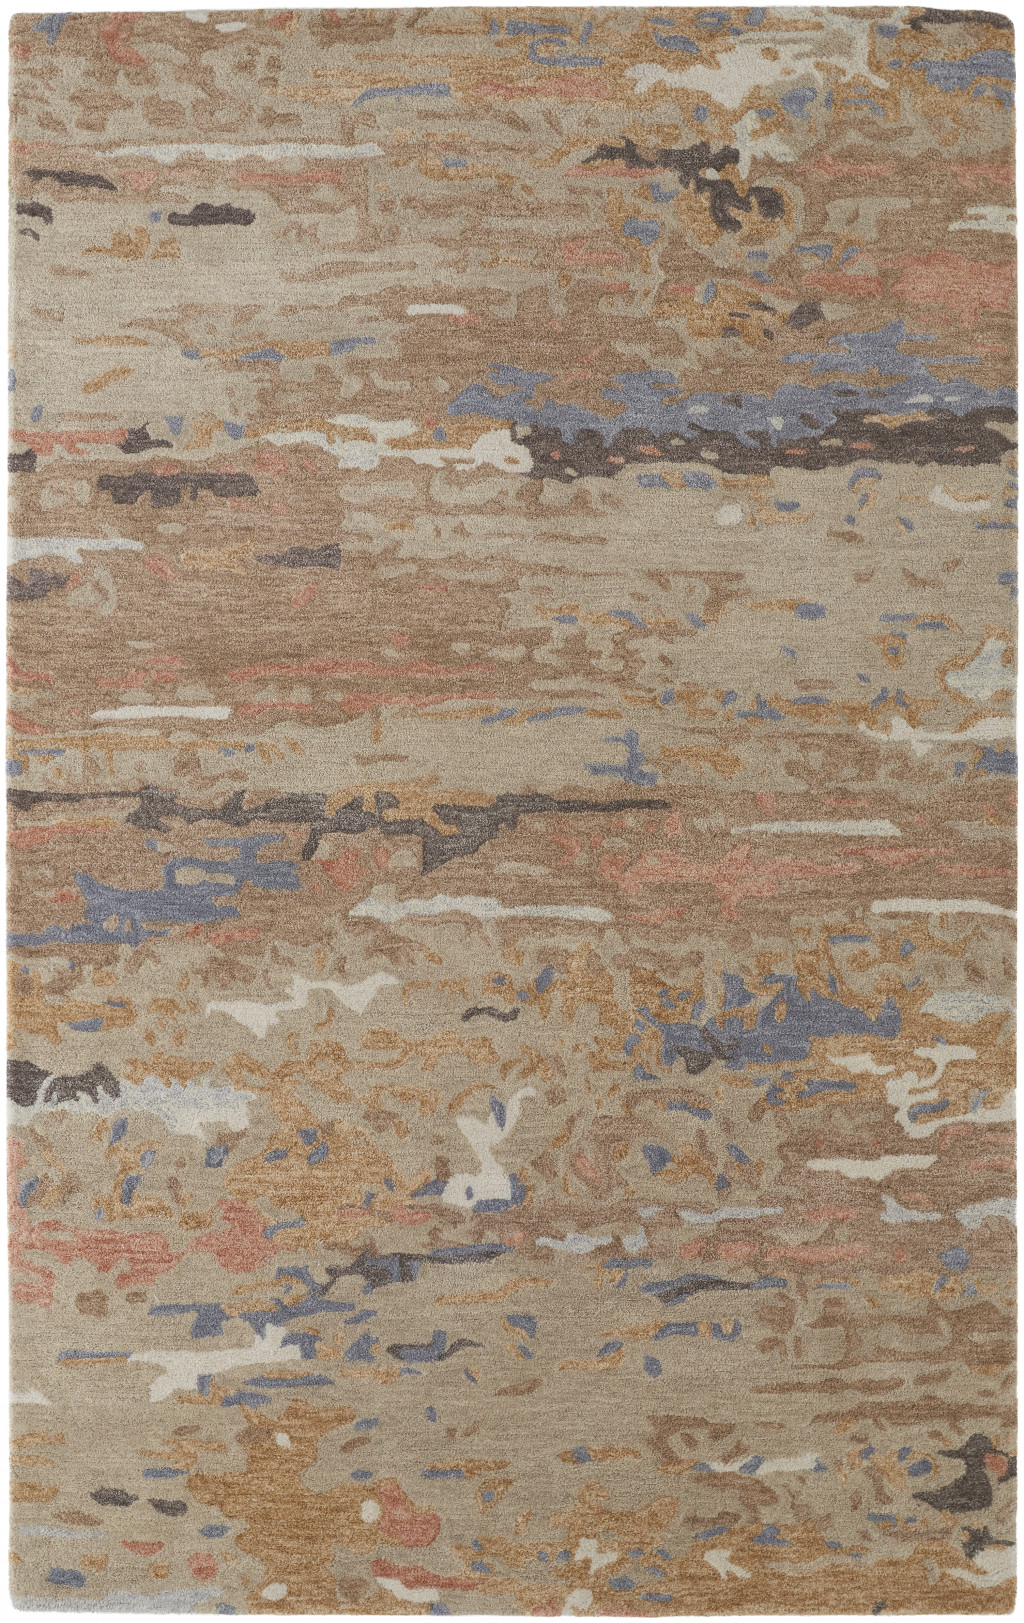 8' X 10' Tan And Blue Wool Abstract Tufted Handmade Stain Resistant Area Rug-513609-1